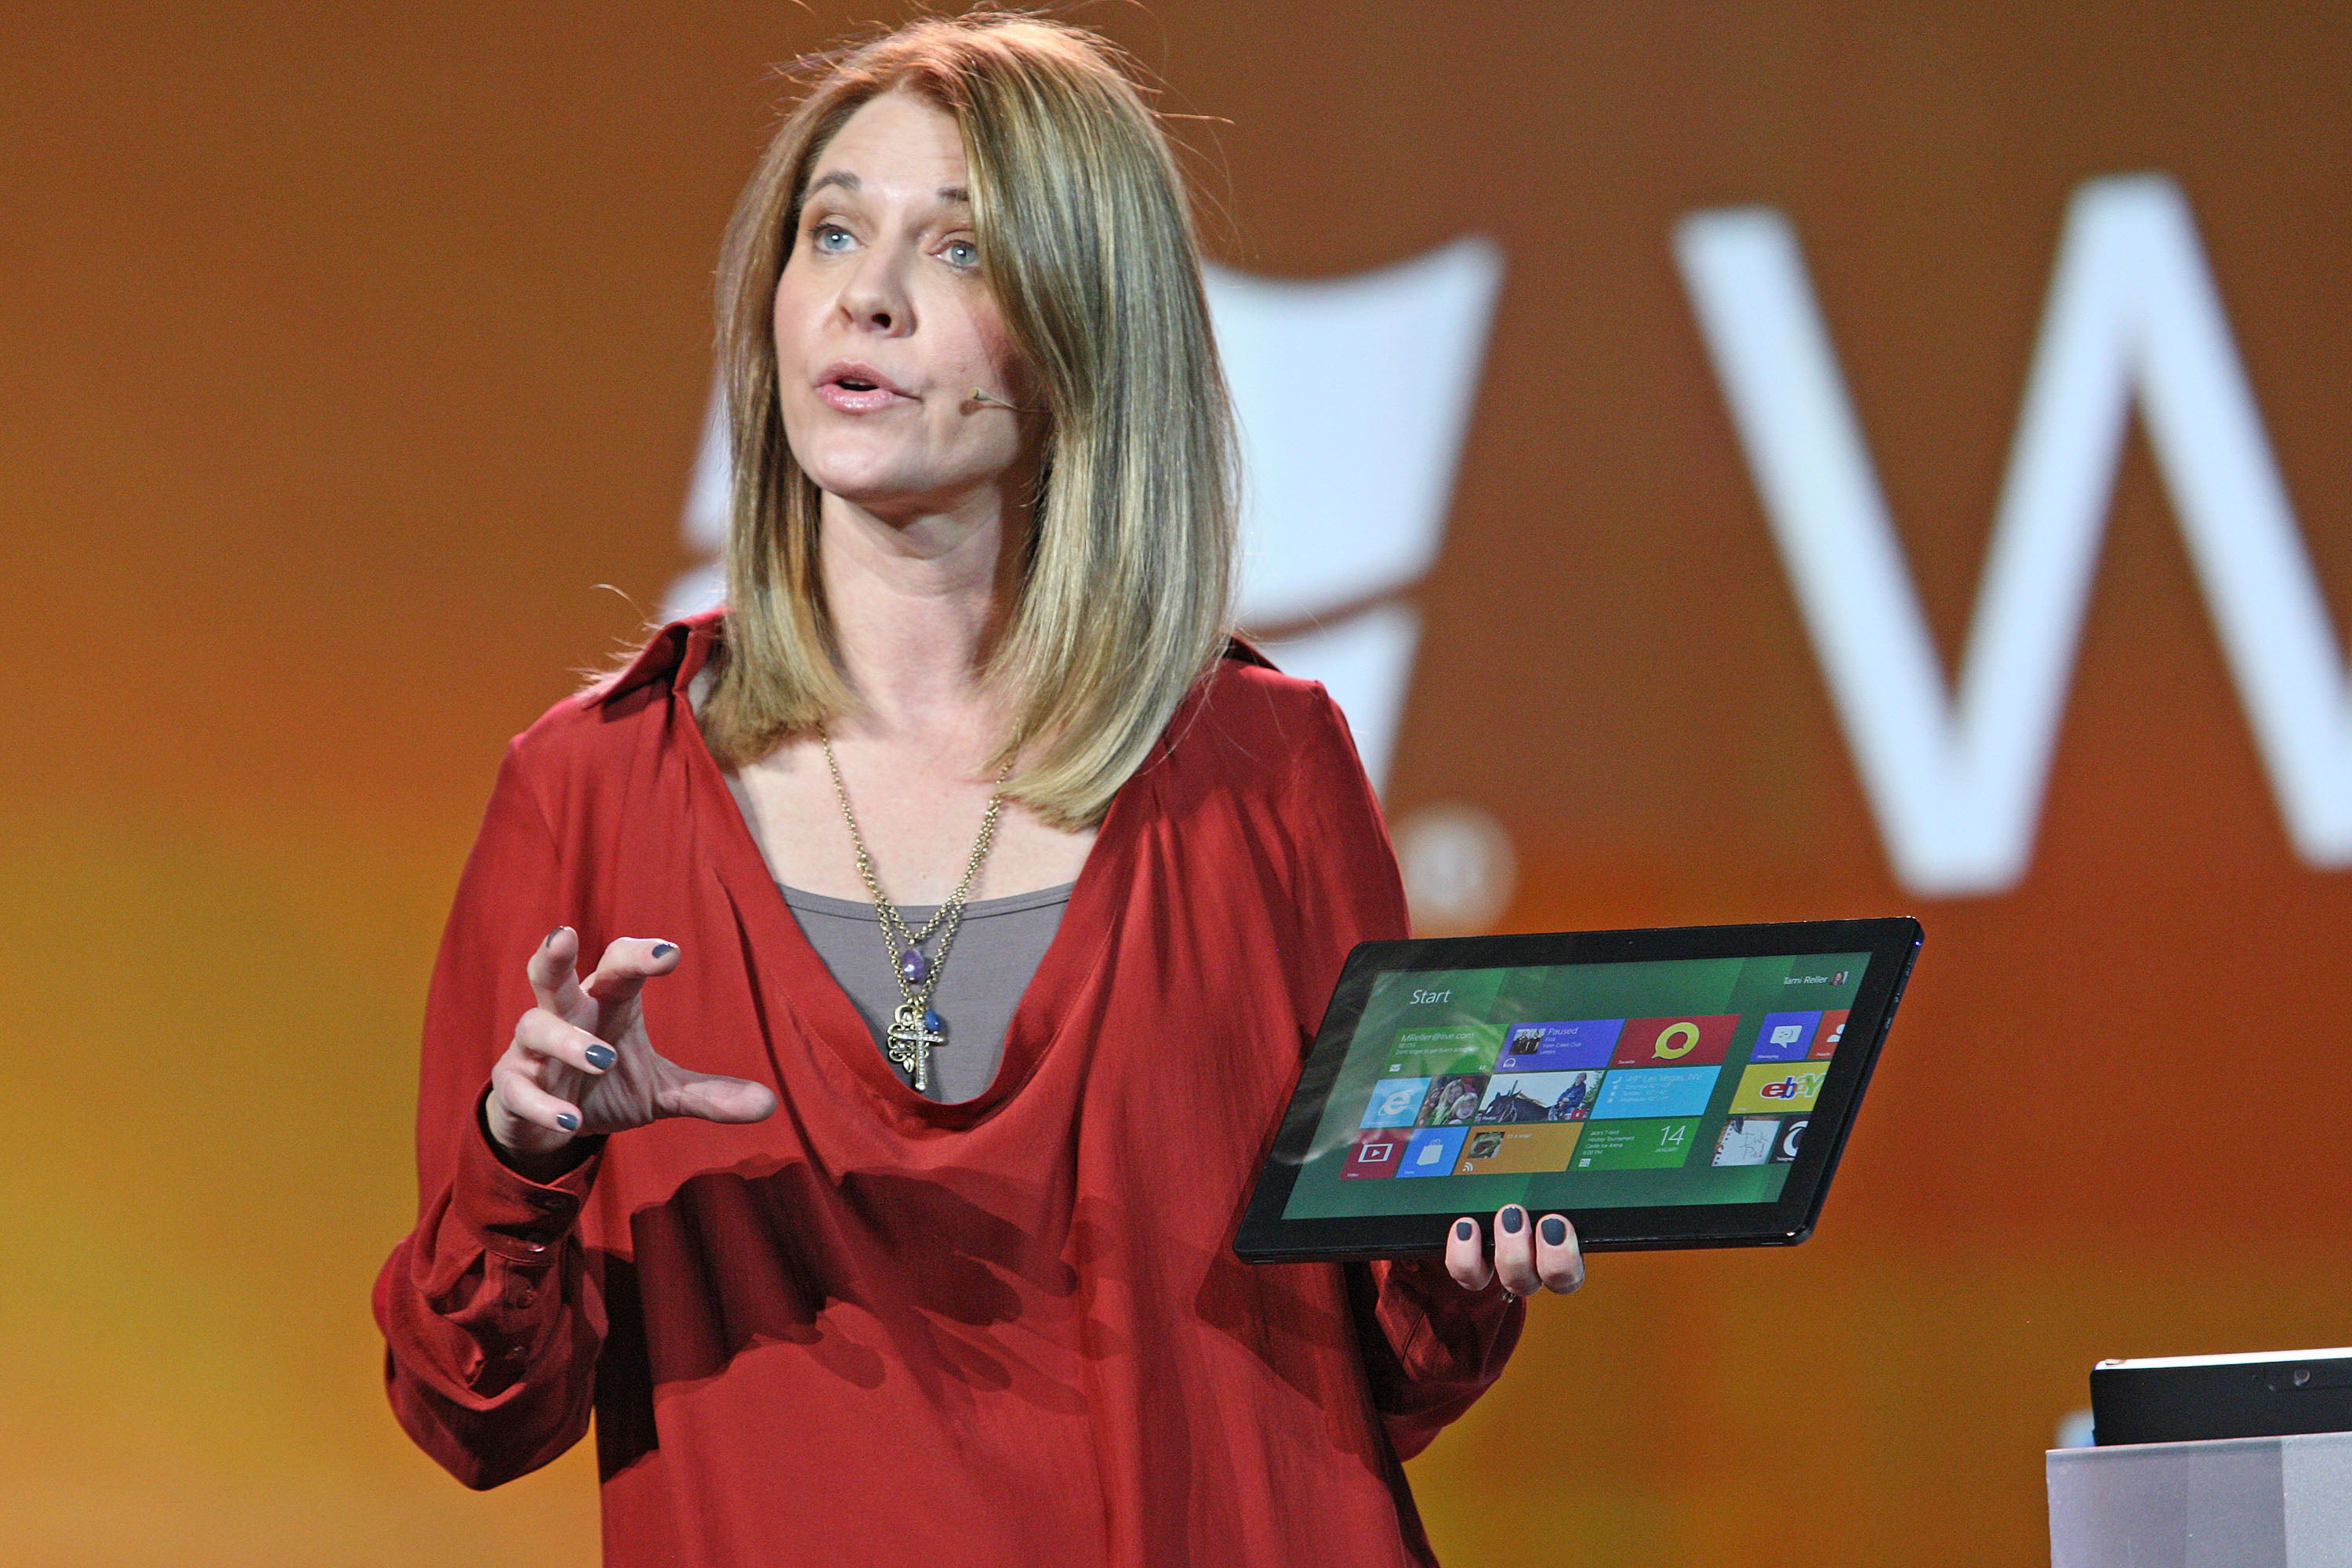 Microsoft's Tami Reller spilled the beans on Windows Blue - Microsoft confirms Windows Blue is coming; update will allow for smaller screened tablets